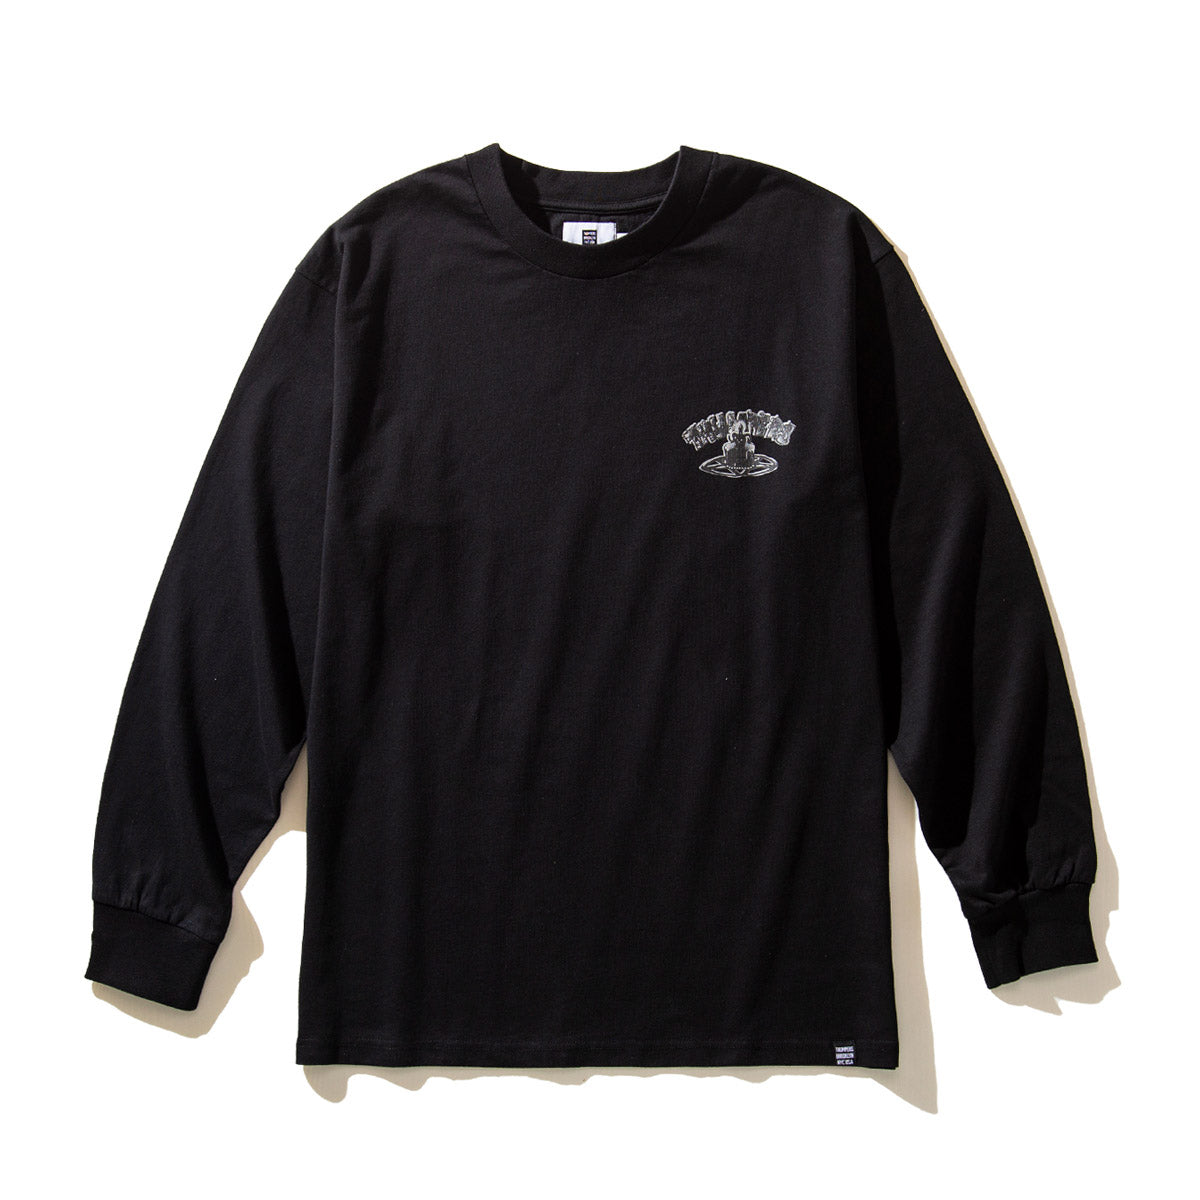 Welcome to the Party L/S TEE